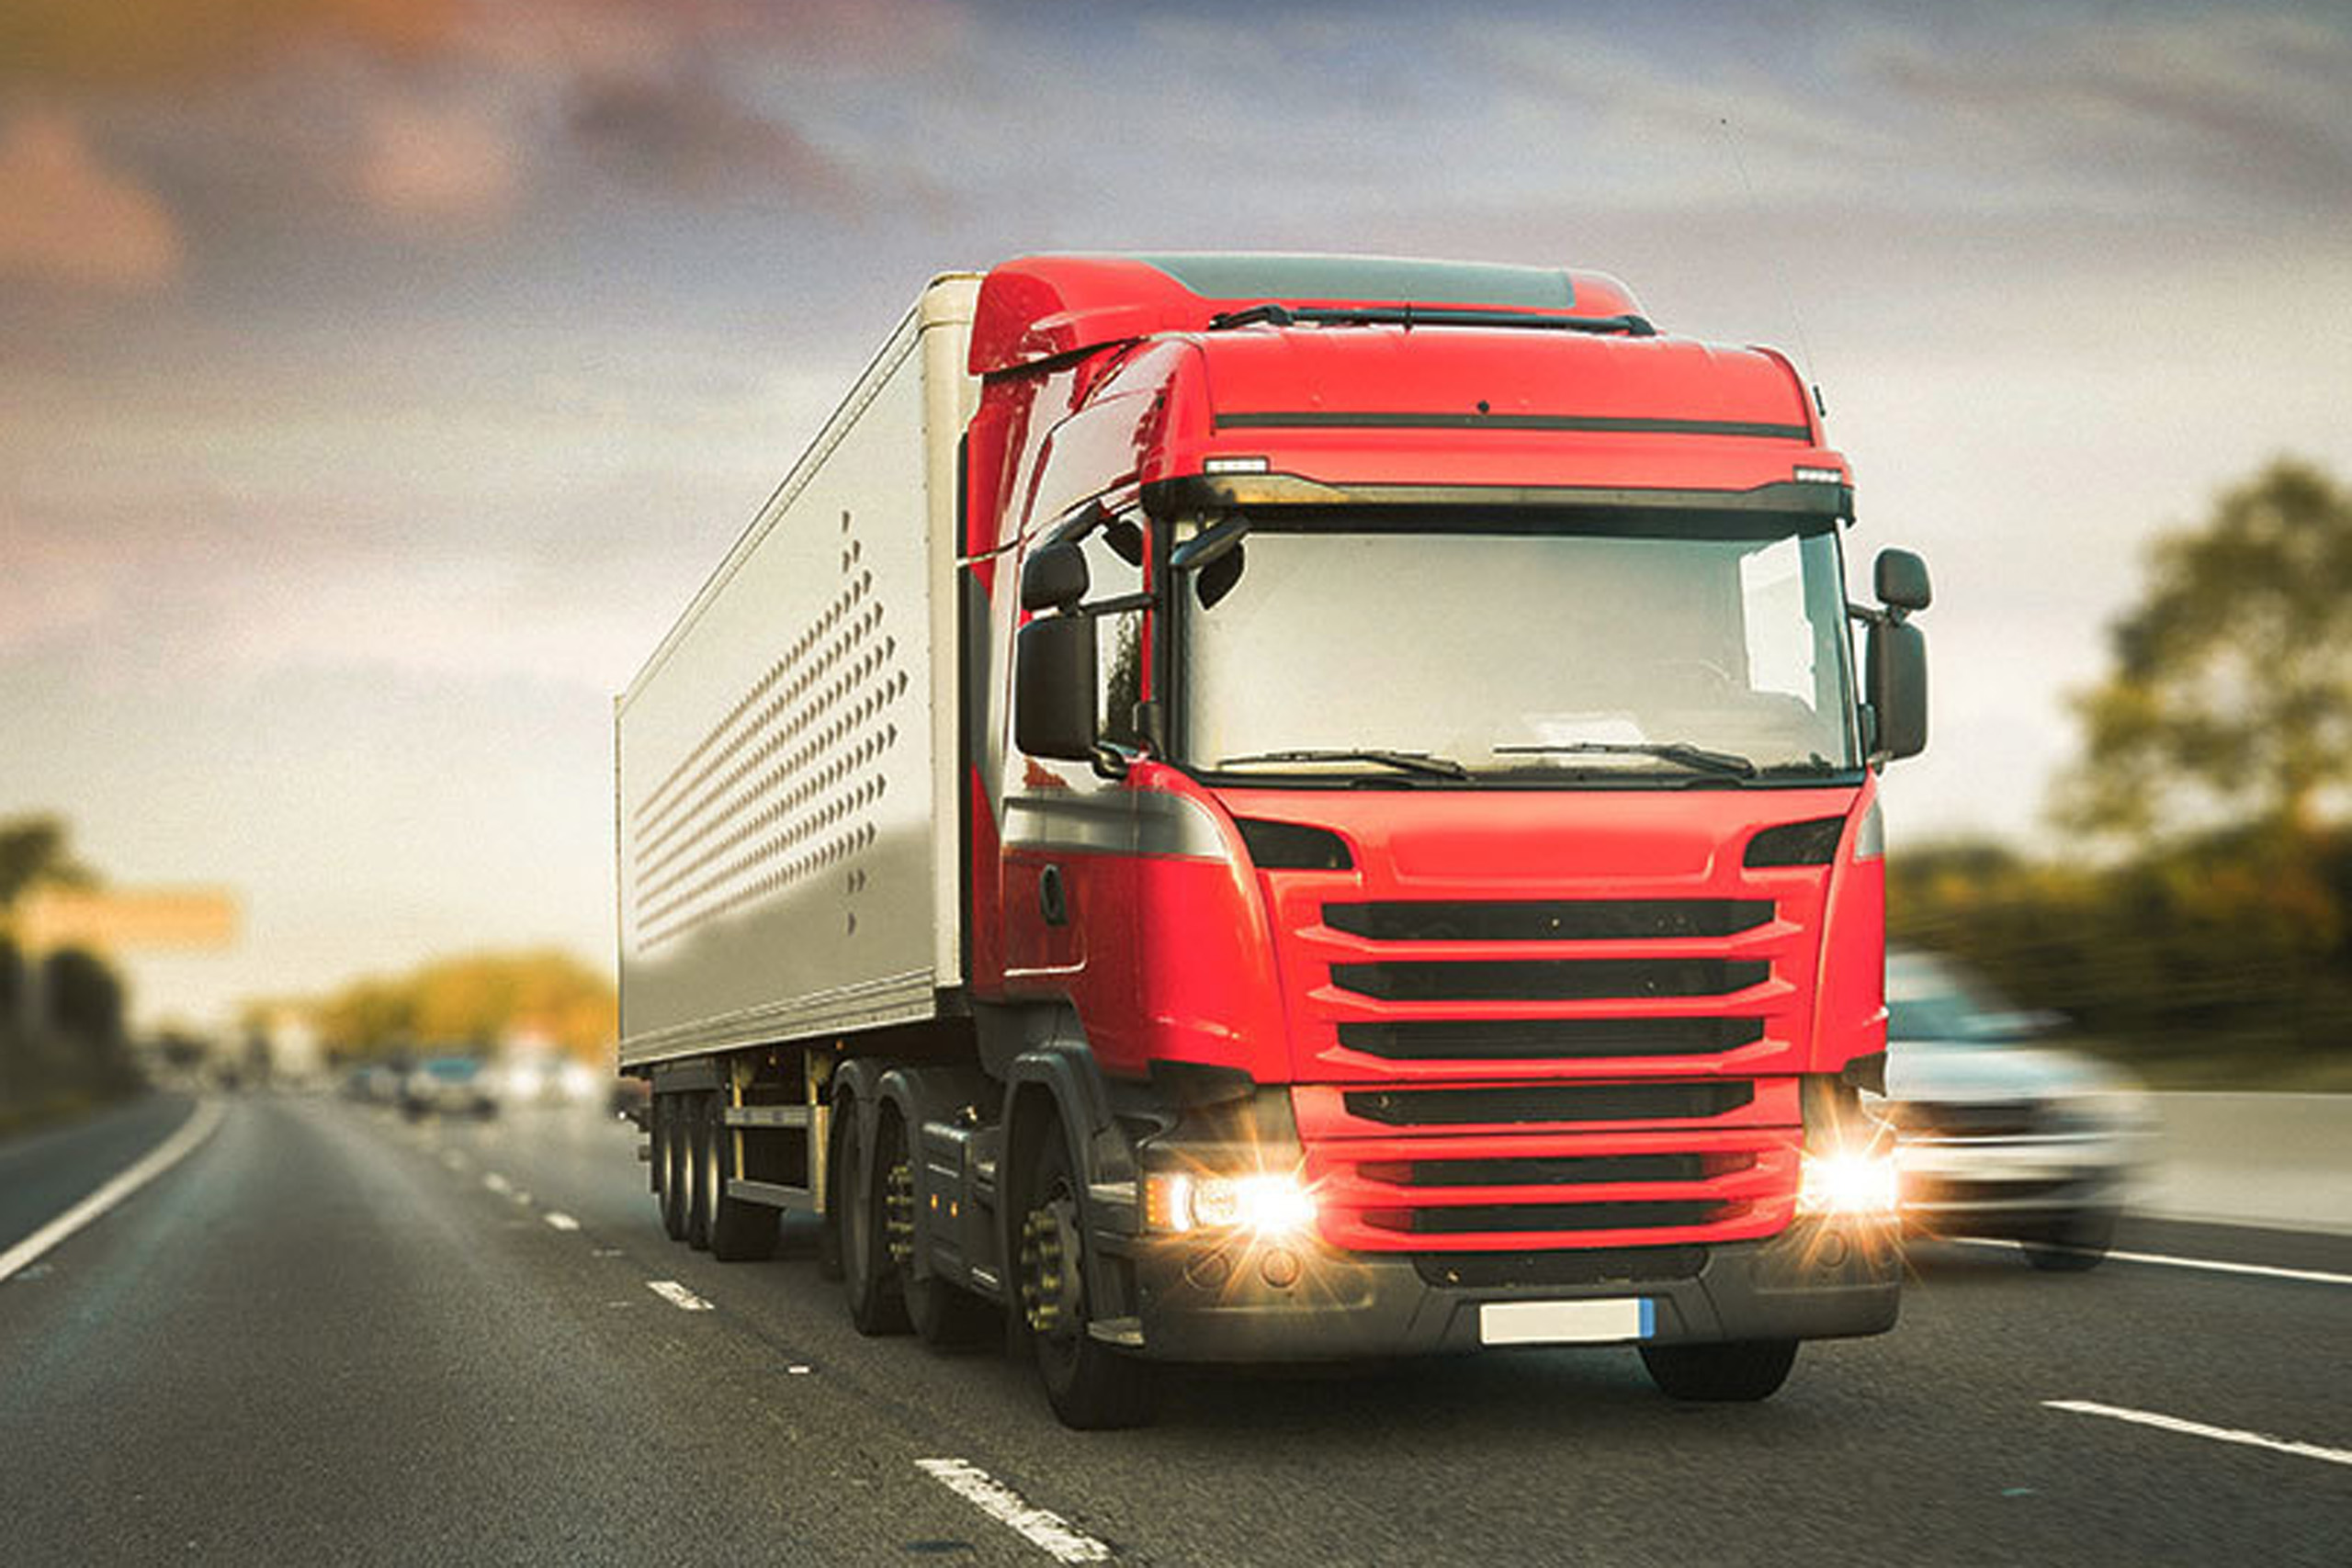 Legal Working Hours For HGV Drivers In The UK